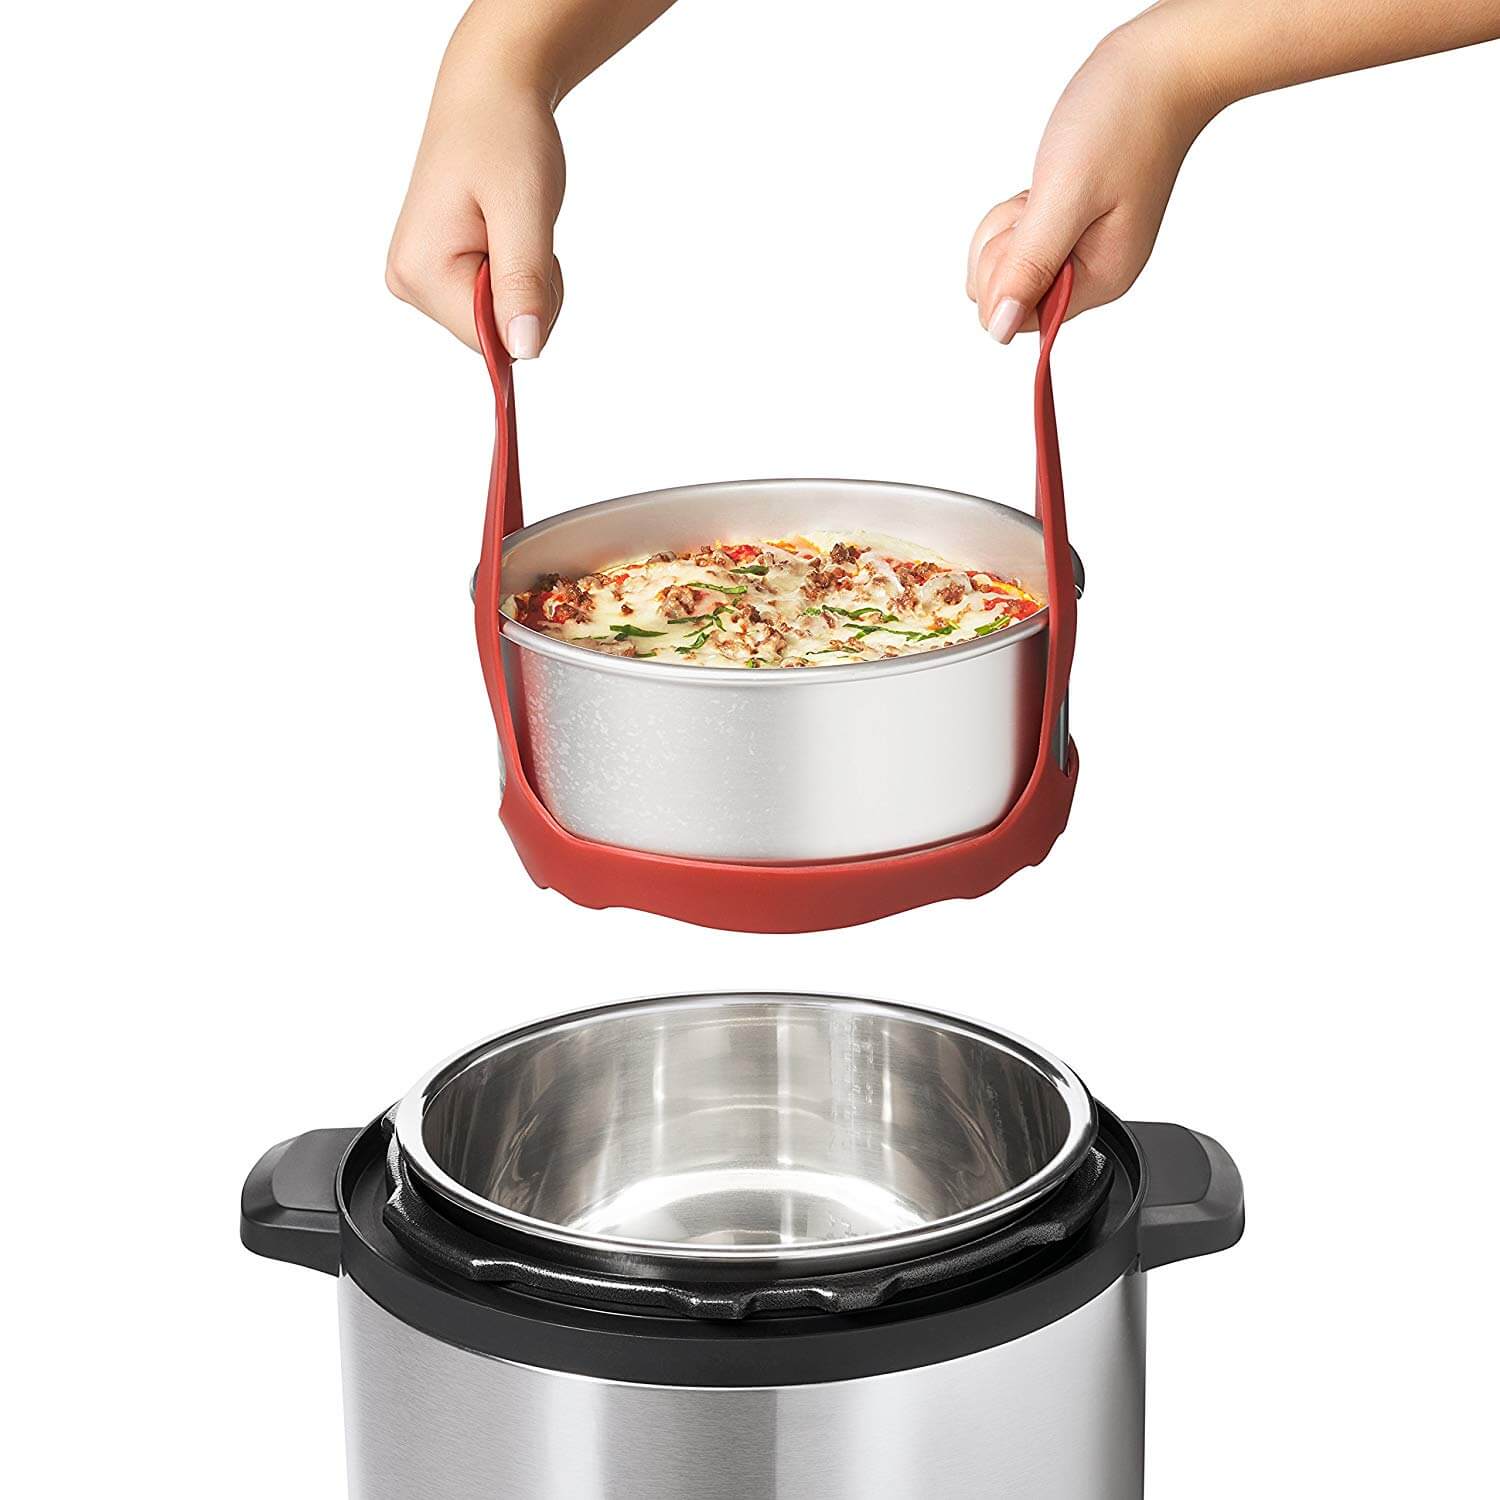 https://merryabouttown.com/wp-content/uploads/2018/09/Oxo-Pressure-Cooker-sling.jpg